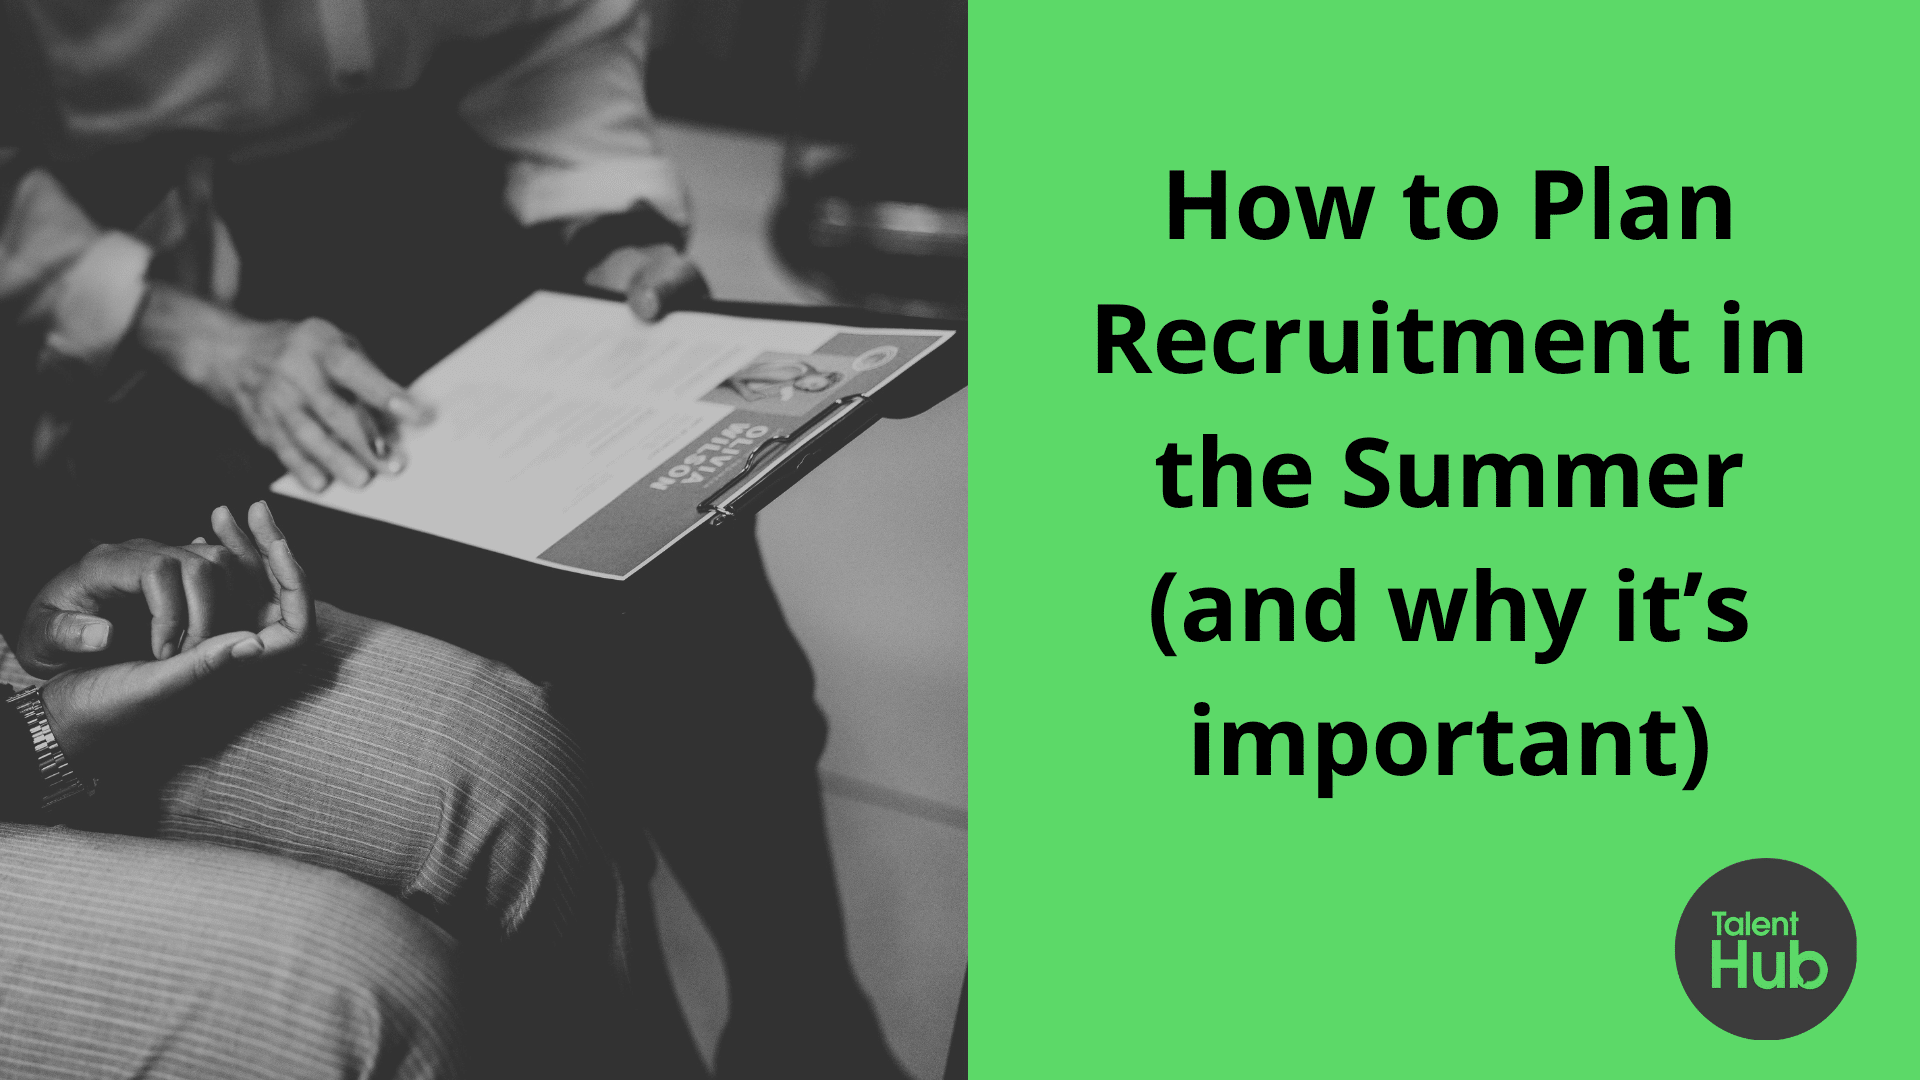 How to plan recruitment in the summer